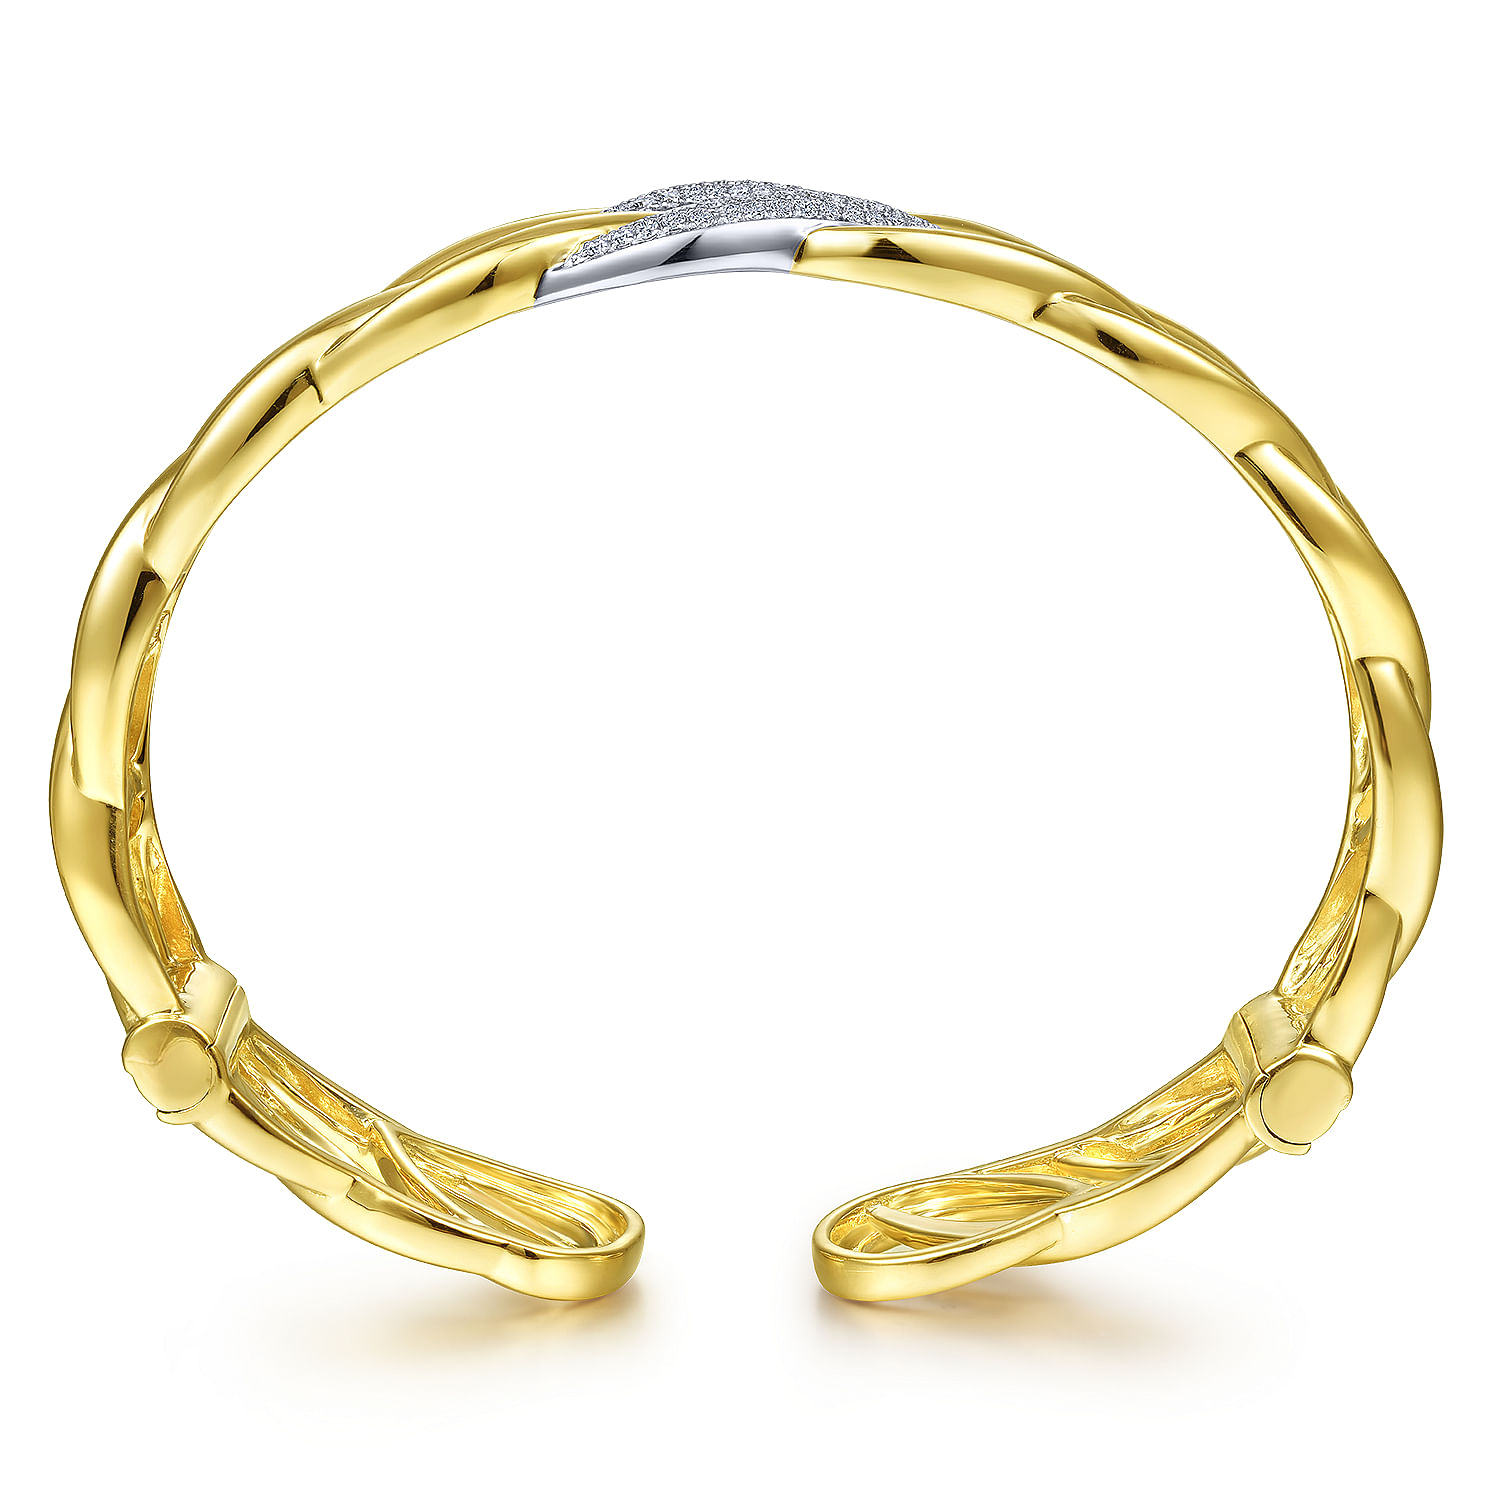 14K Yellow Gold Chain Link Cuff Bracelet with White Gold Pave Diamond Station - 0.42 ct - Shot 3